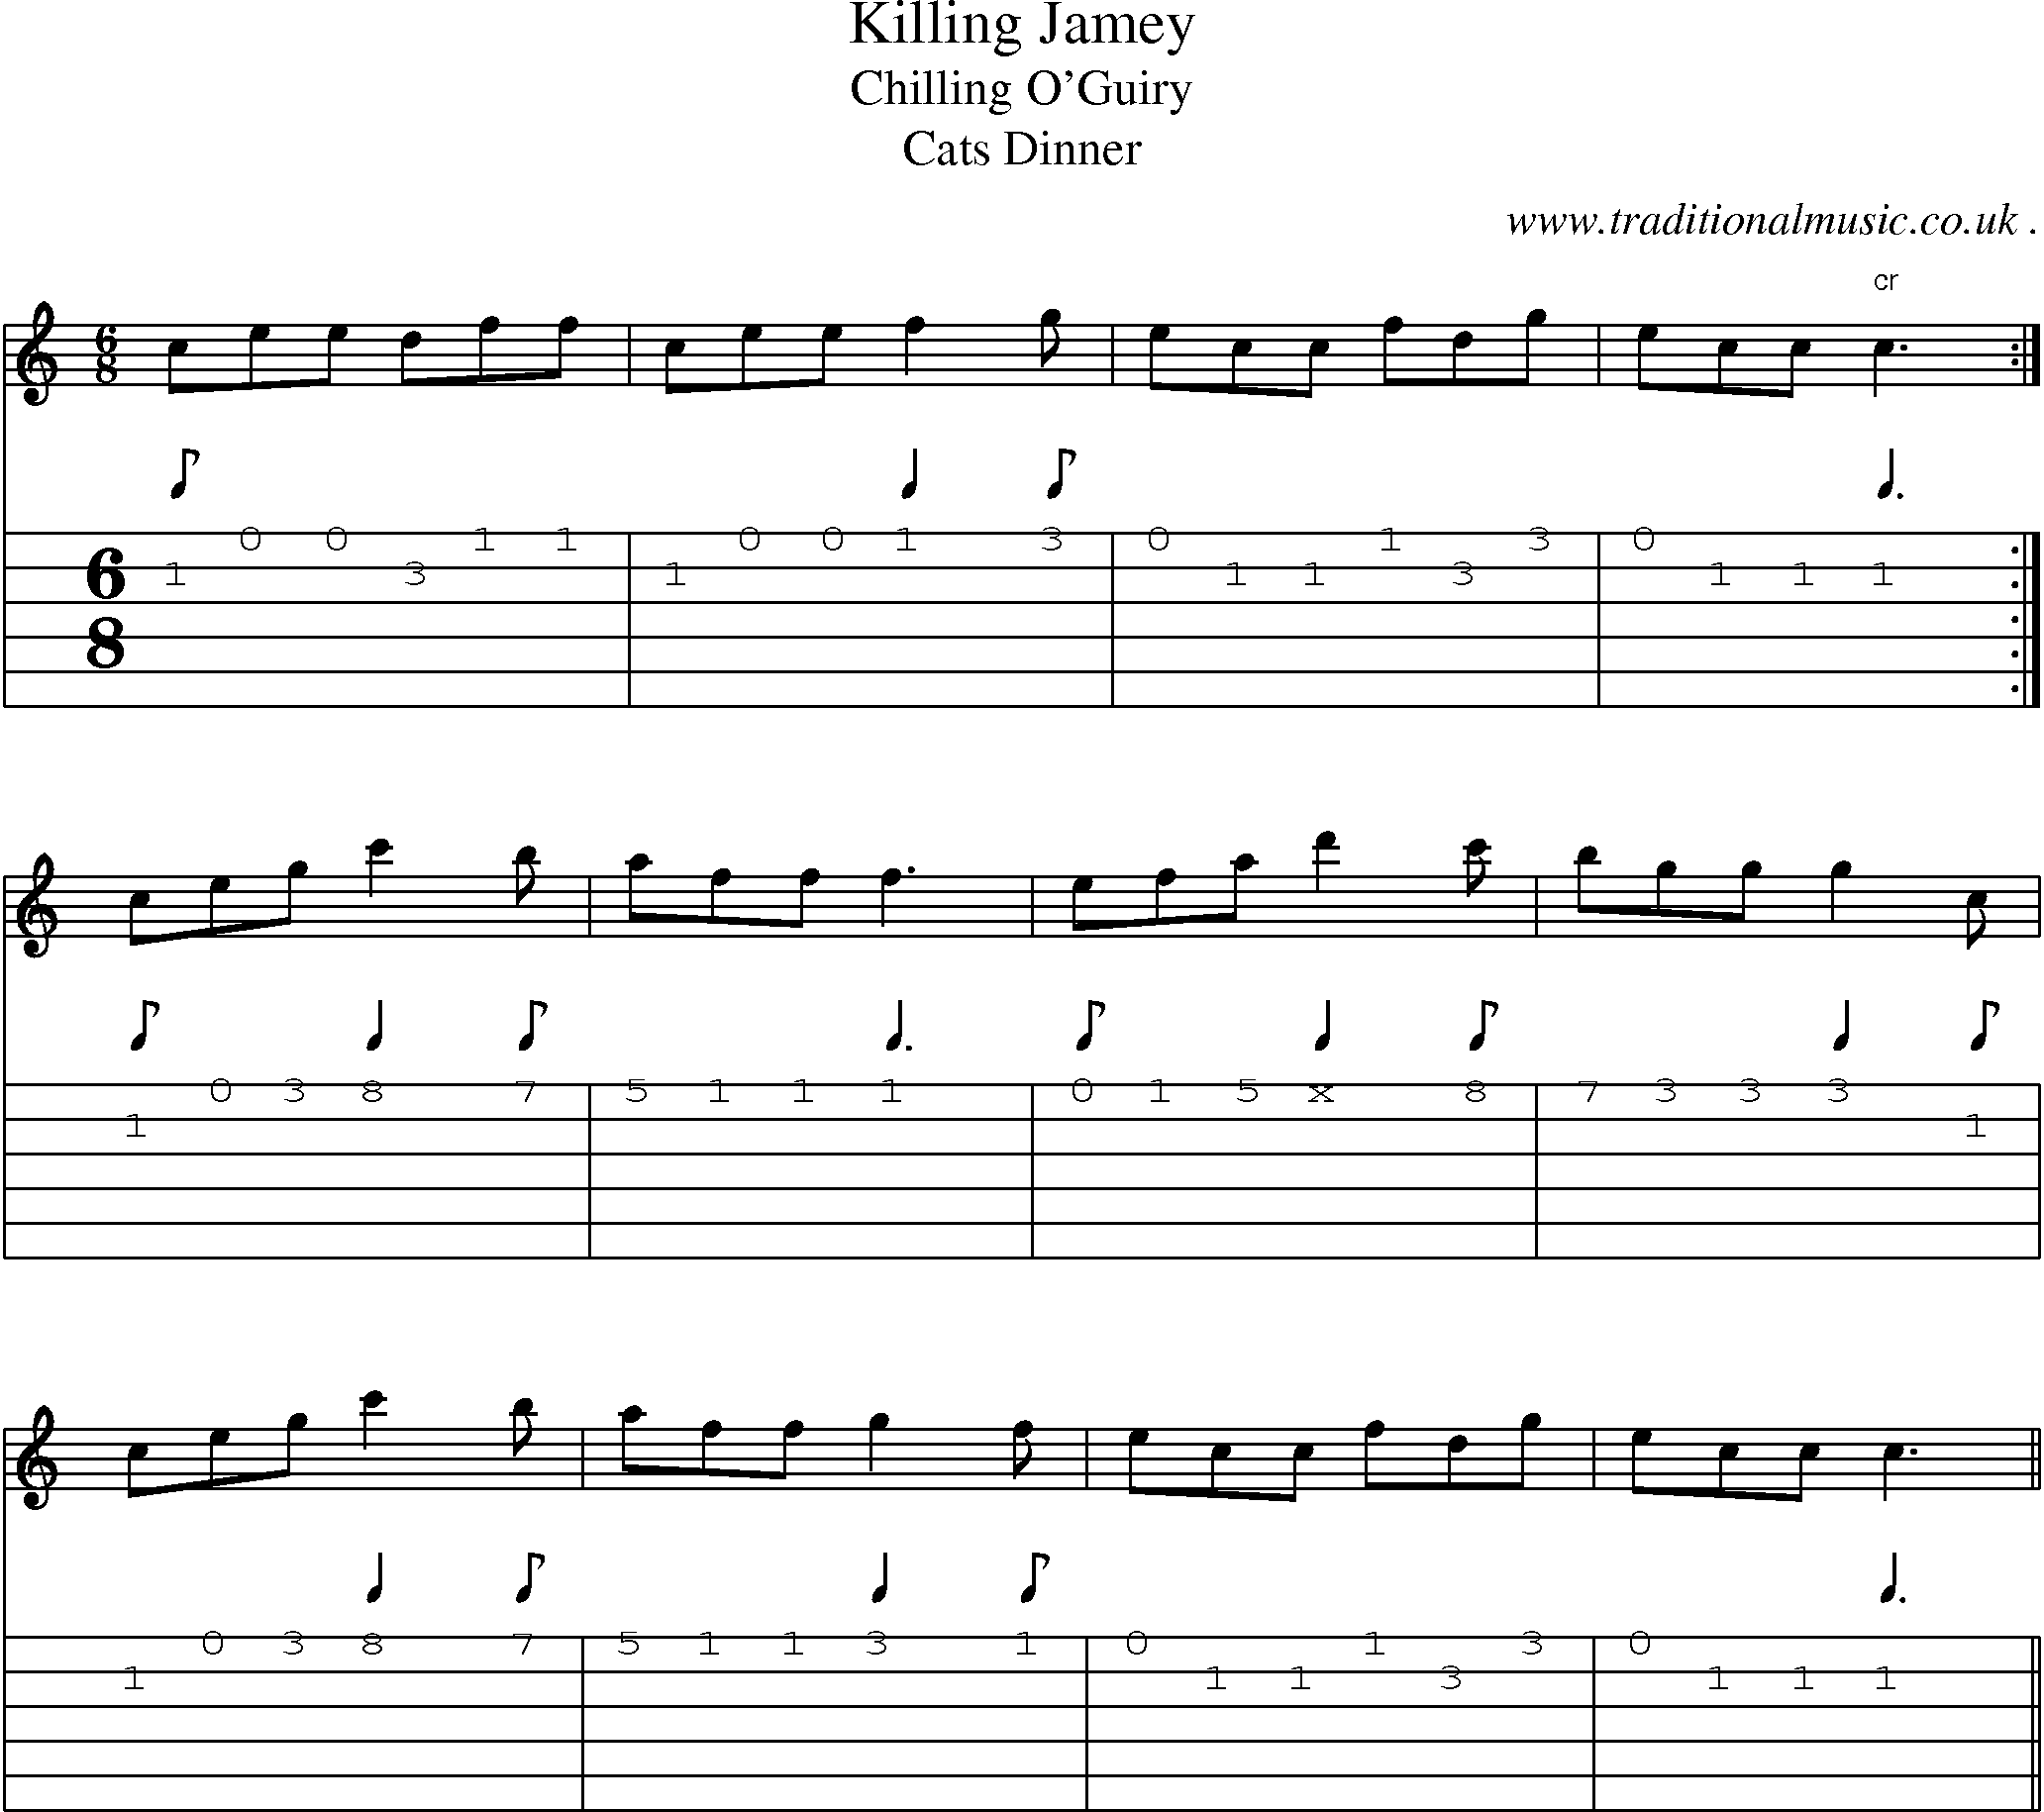 Sheet-Music and Guitar Tabs for Killing Jamey